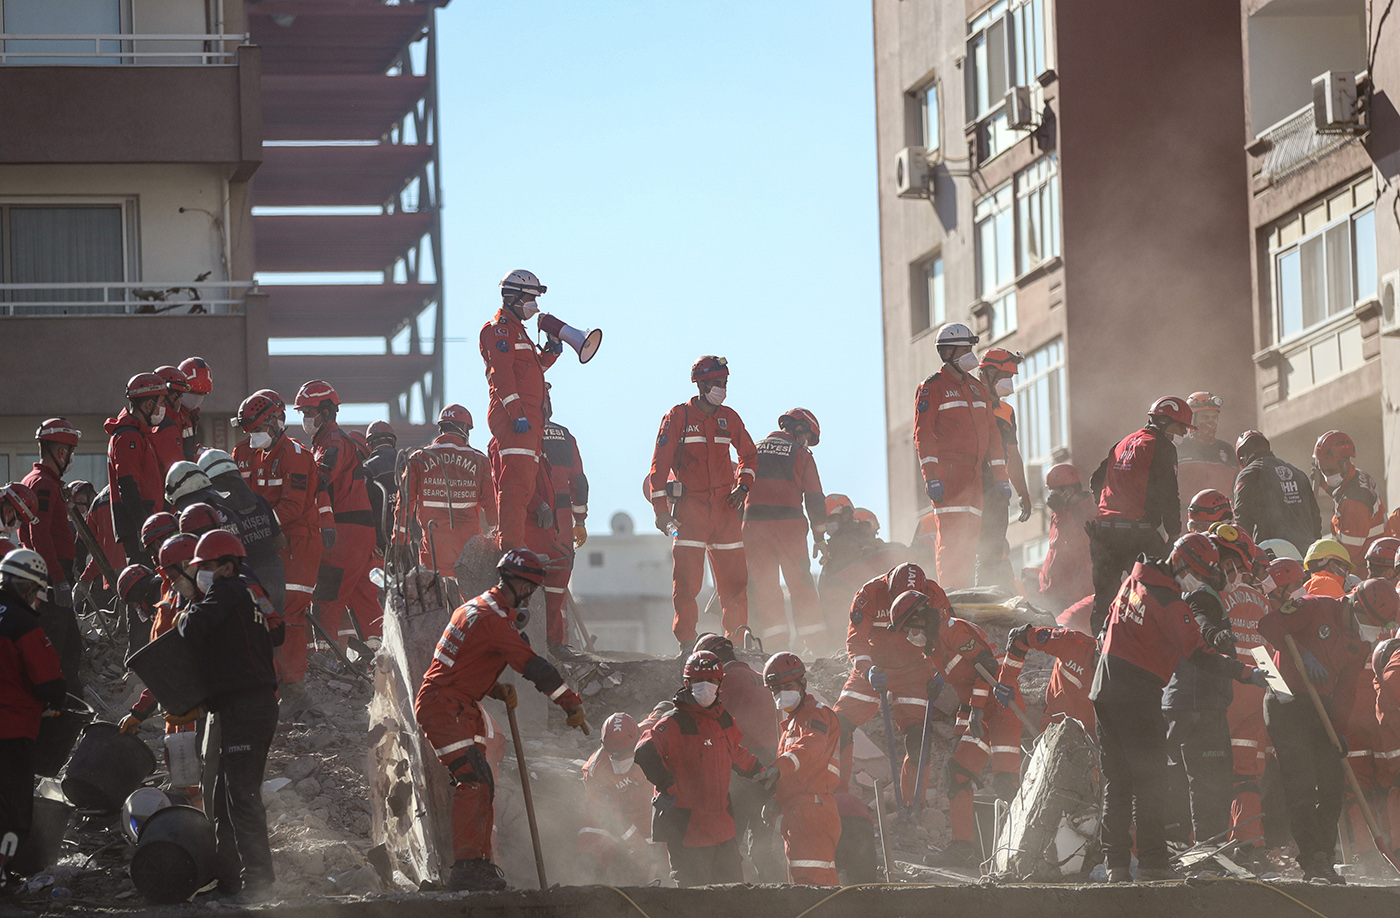 Rescue workers search for survivors at the site of a collapsed building after a 7.0 magnitude earthquake in the Aegean Sea, at Bayrakli district in the Aegean Sea, at Bayrakli district in Izmir, Turkey, 02 November 2020. According to Turkish media reports, at least 85  people died while more than eight  hundreds were injured and dozens of buildings were destroyed in the earthquake.